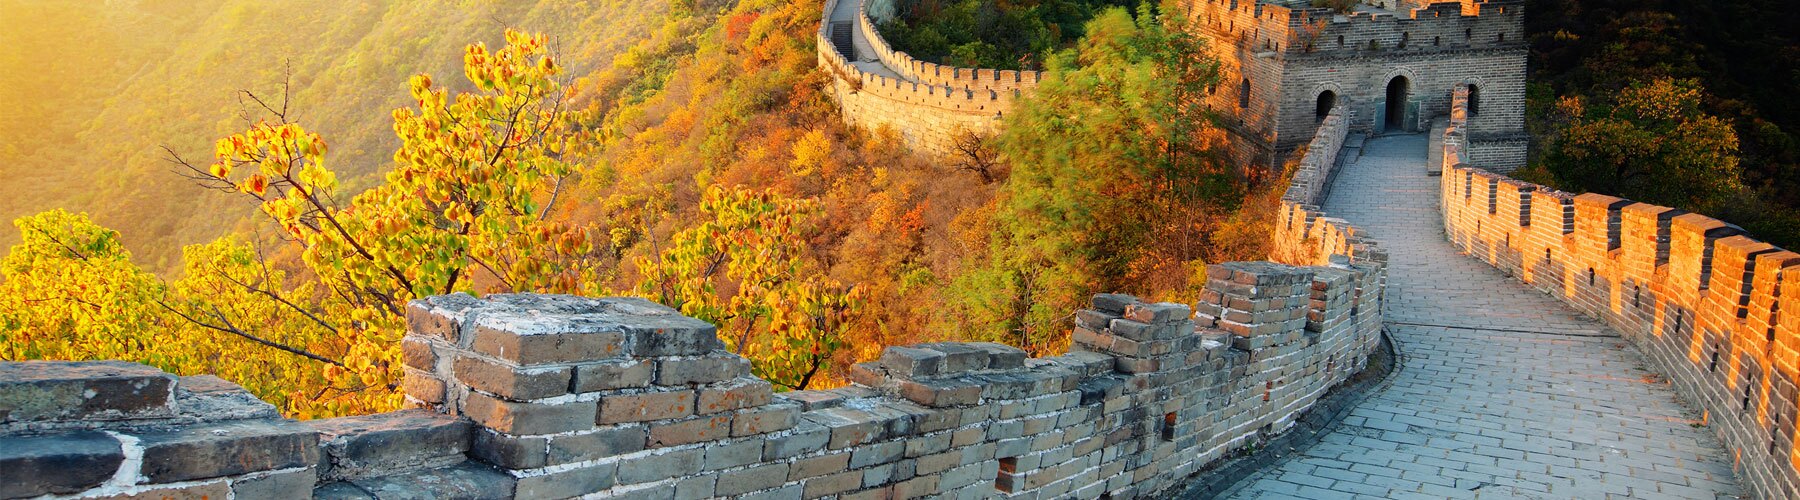 Best Time To Visit The Great Wall